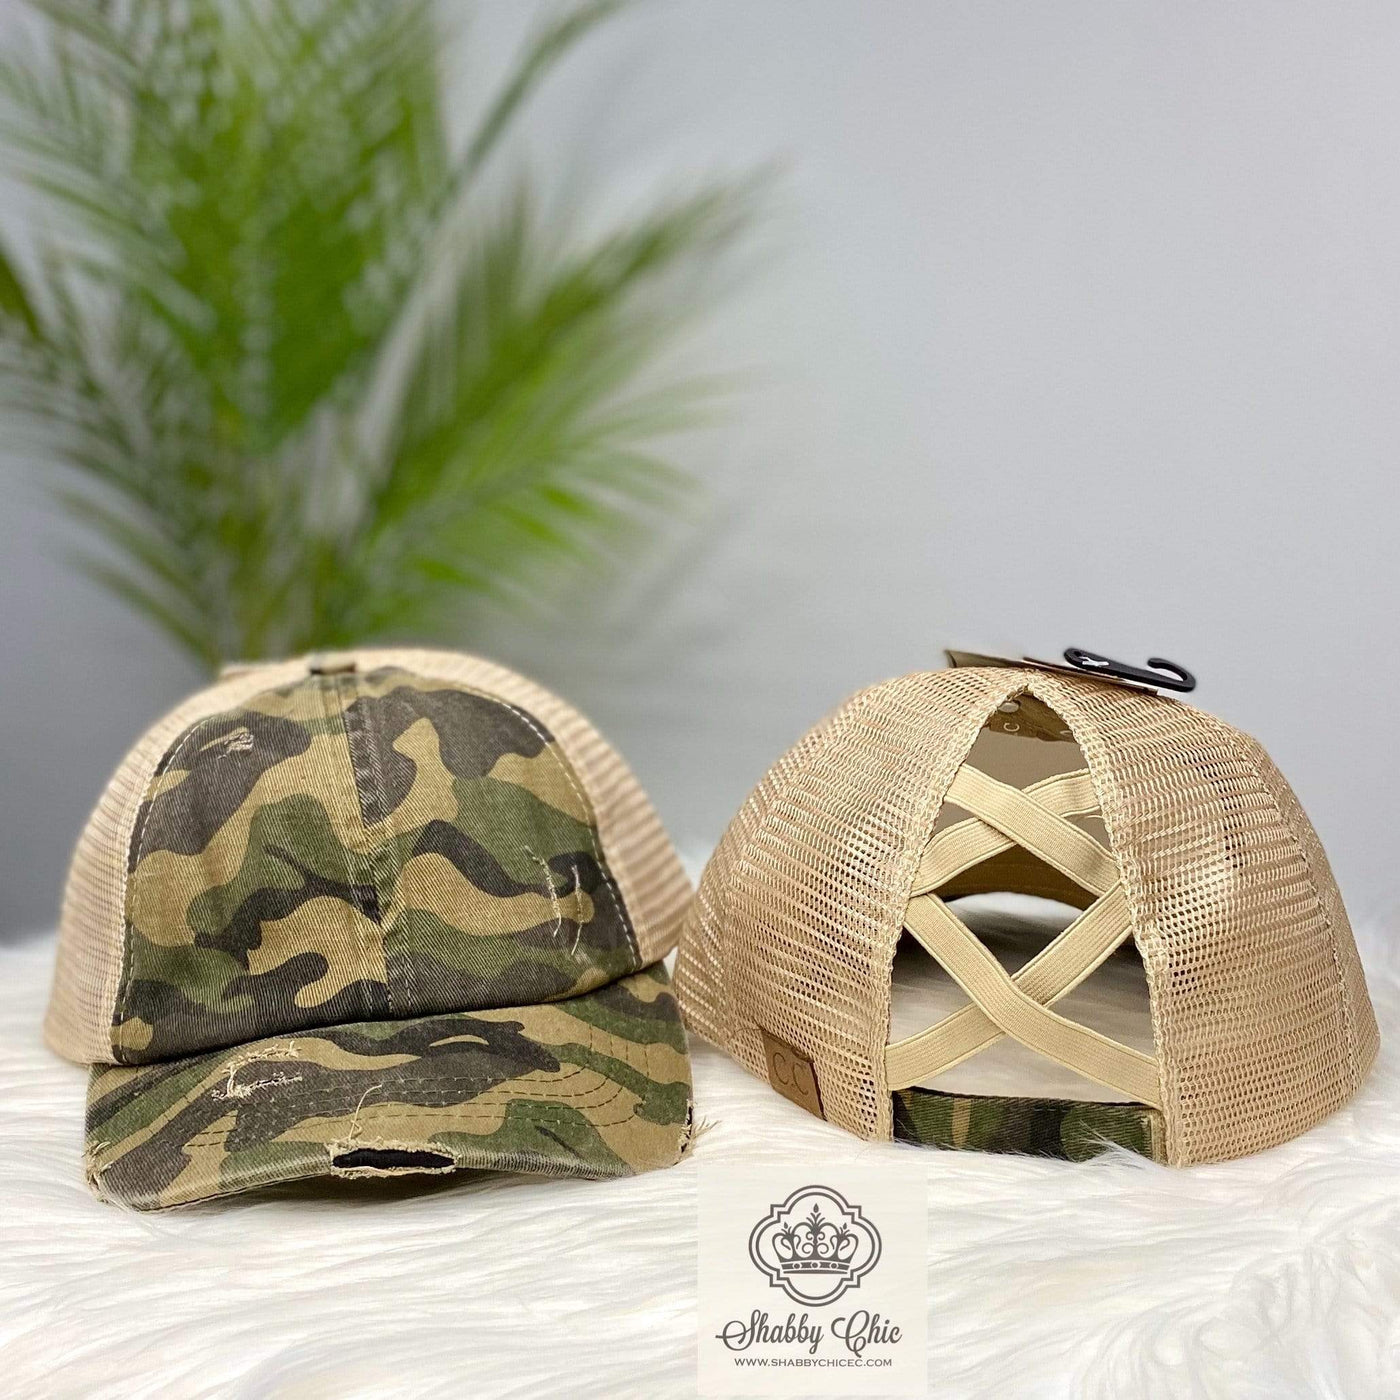 Distressed Camo Criss Cross Trucker Cap Shabby Chic Boutique and Tanning Salon